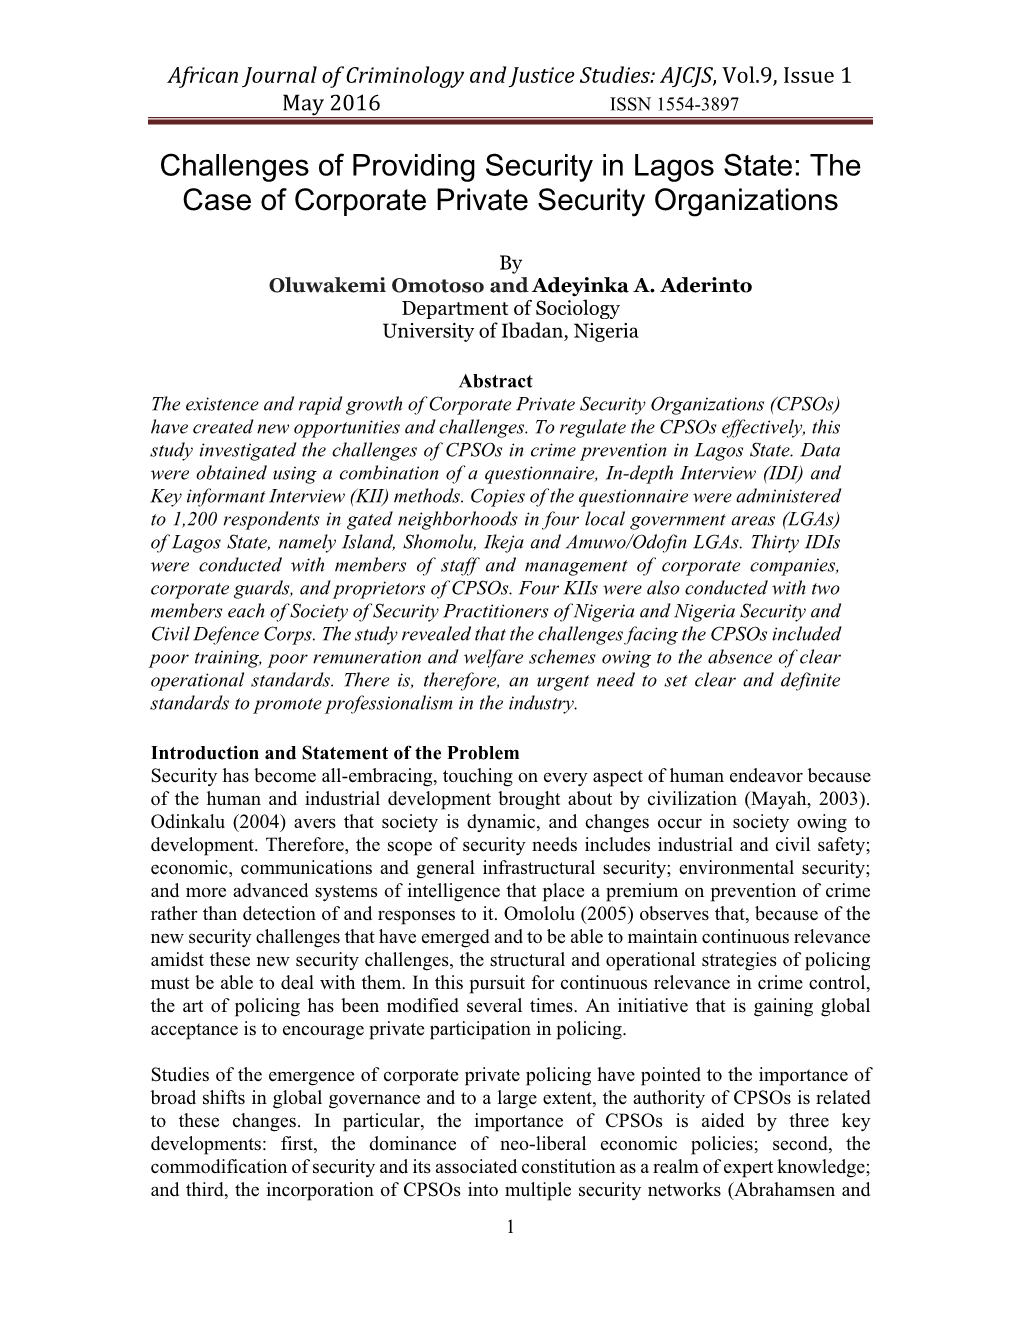 Challenges of Providing Security in Lagos State: the Case of Corporate Private Security Organizations